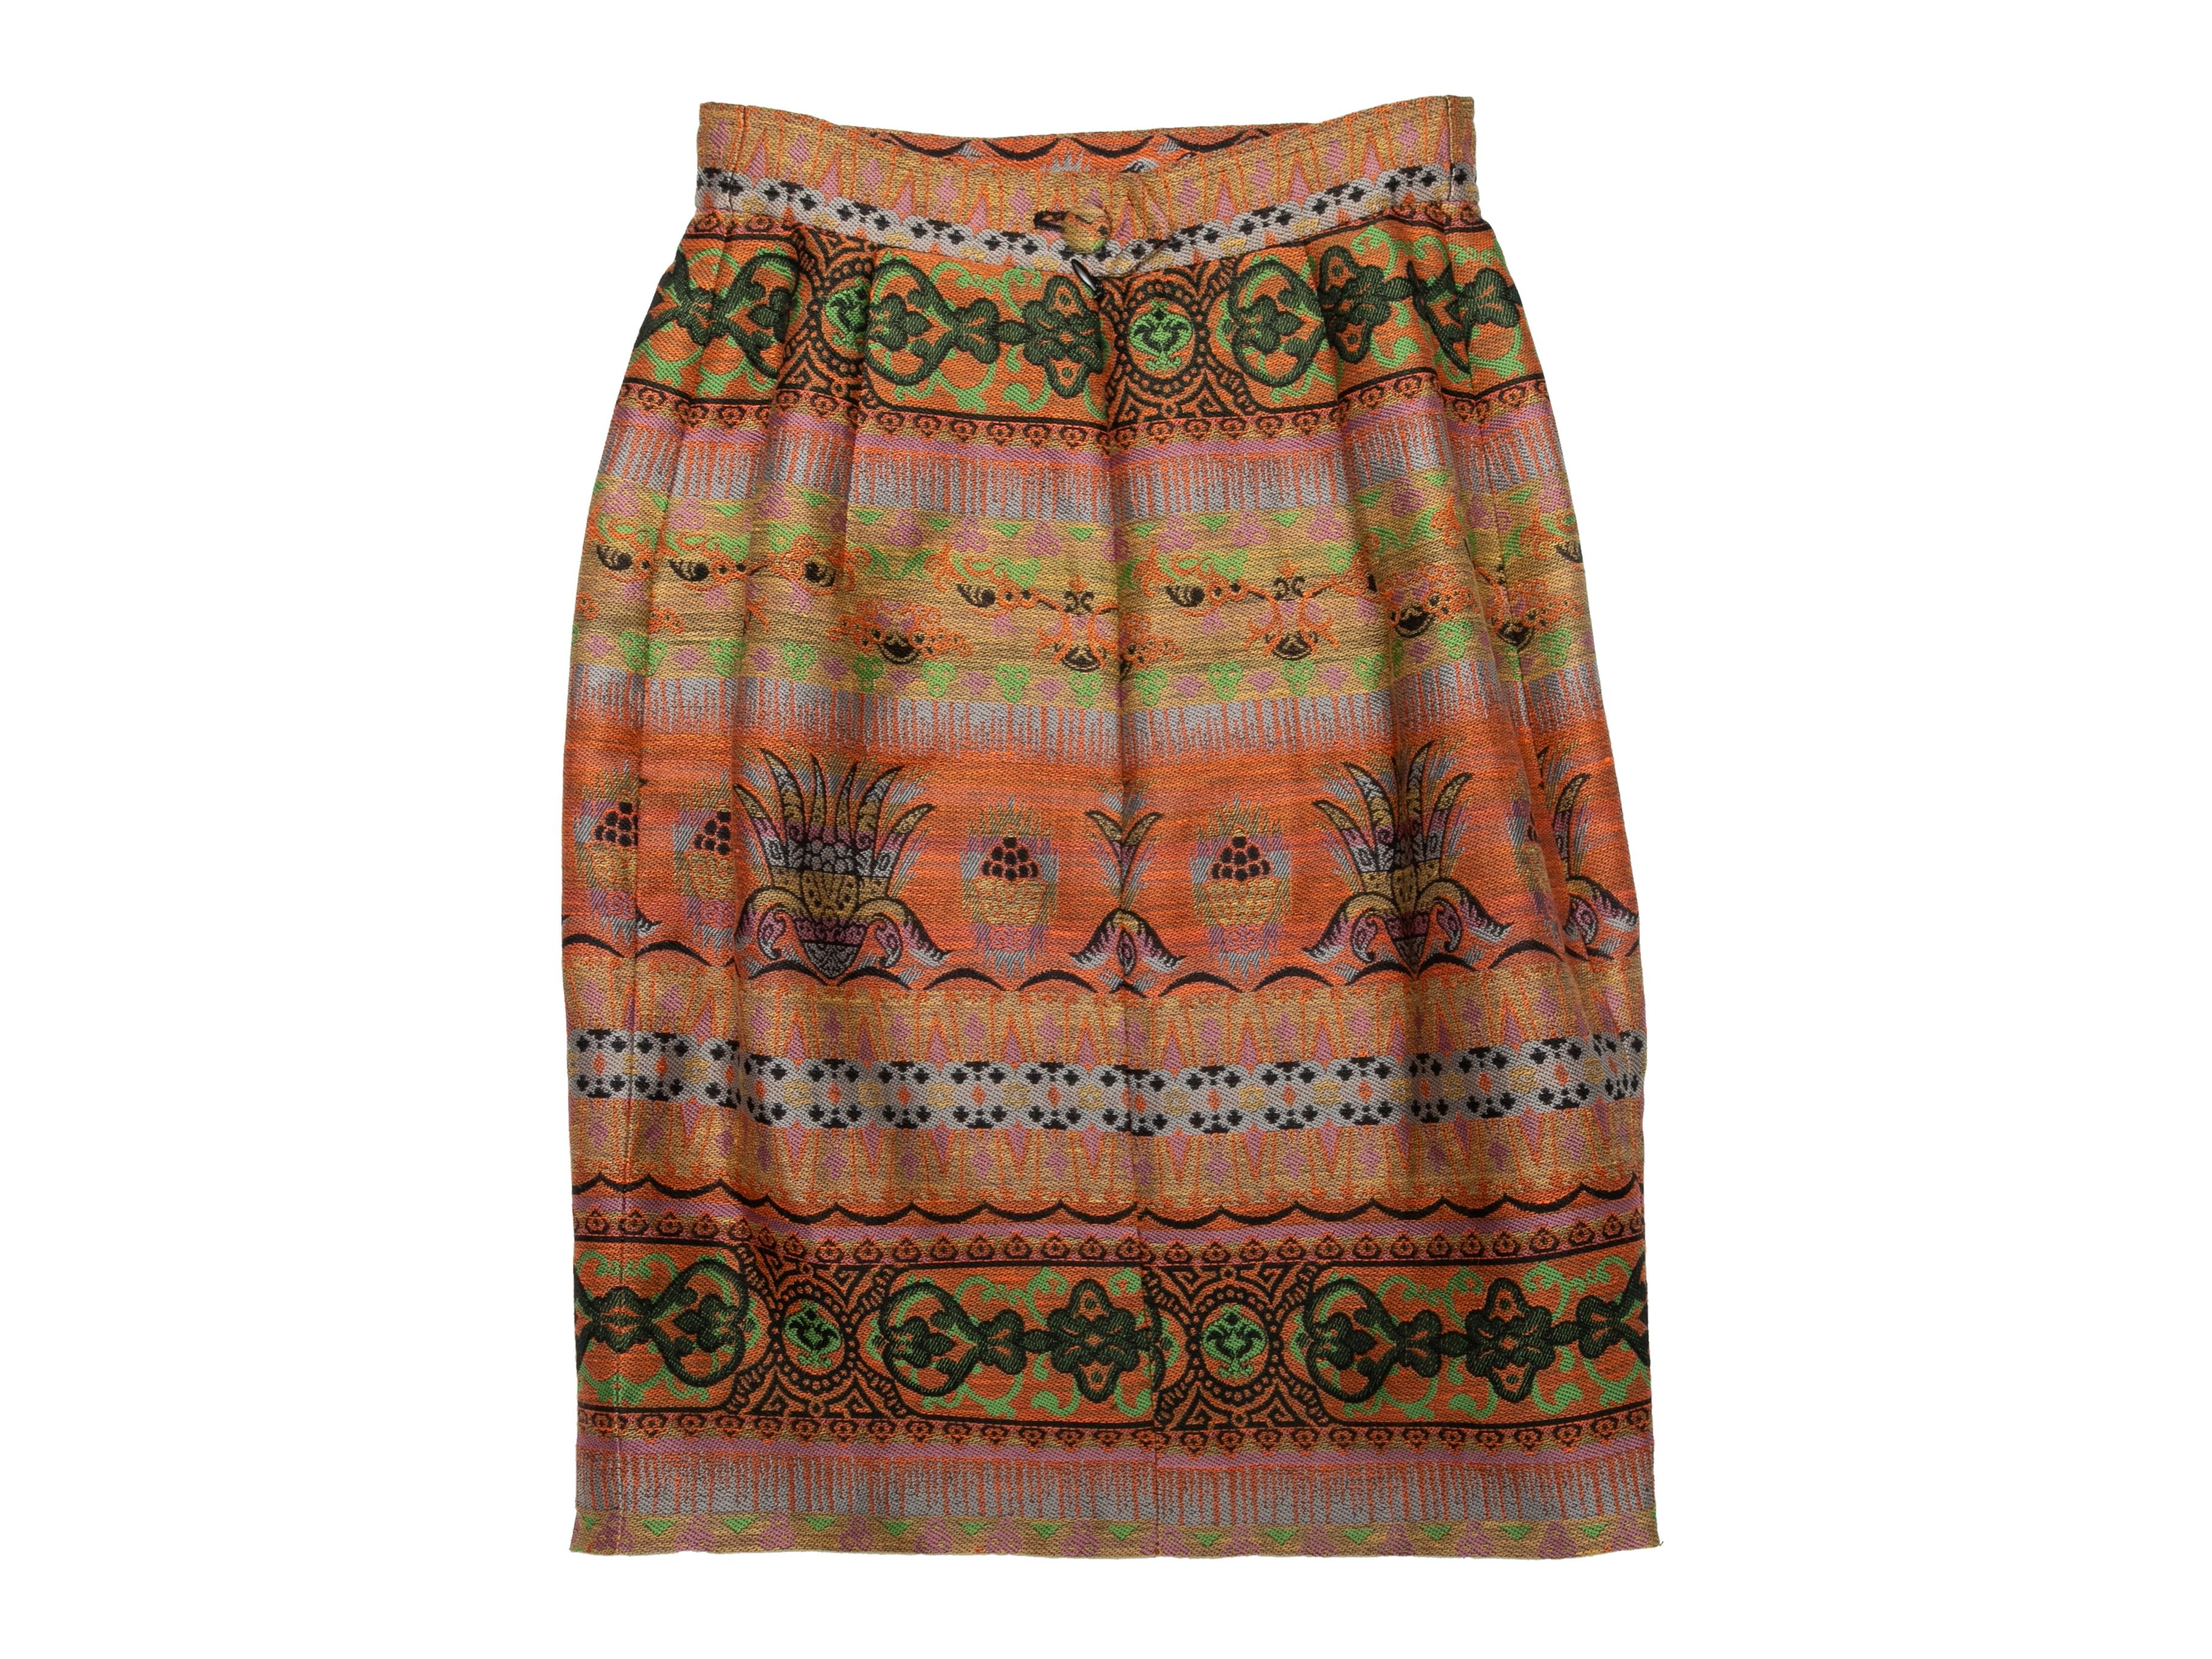 Vintage orange and multicolor jacquard patterned pencil skirt by Christian Lacroix. Closure at center back. 23